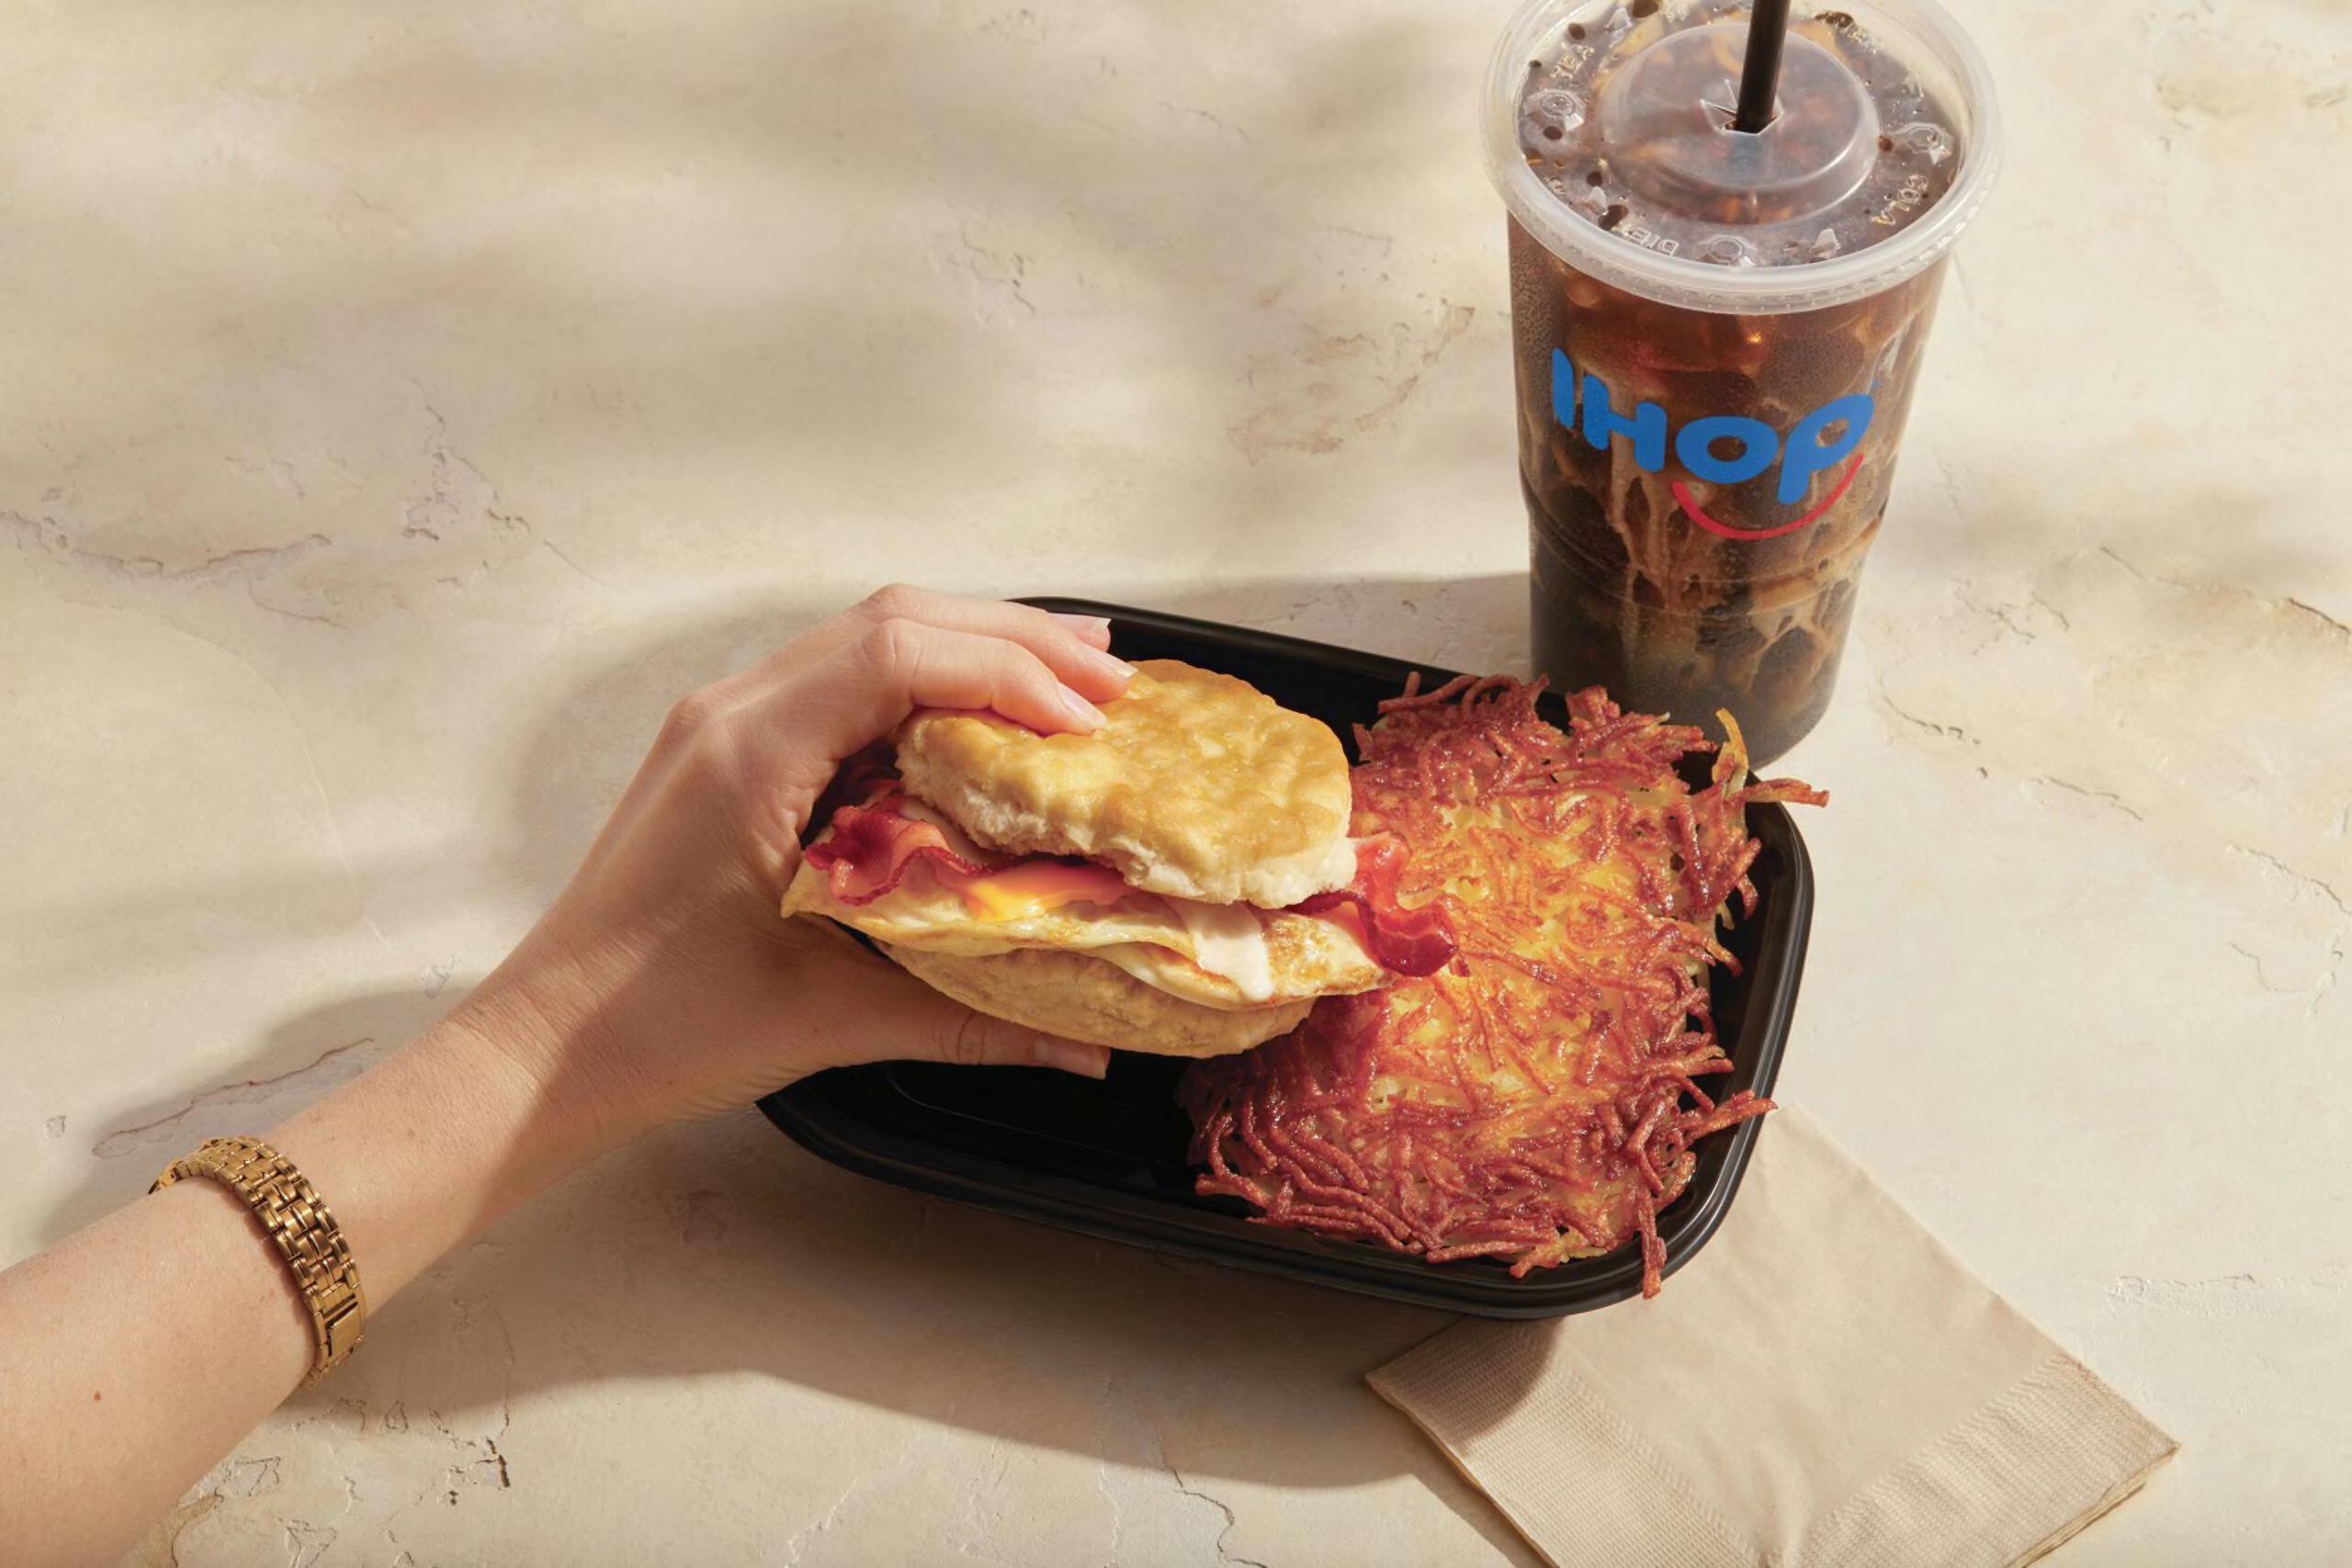 IHOP introduces dedicated biscuit menu with 4 new options